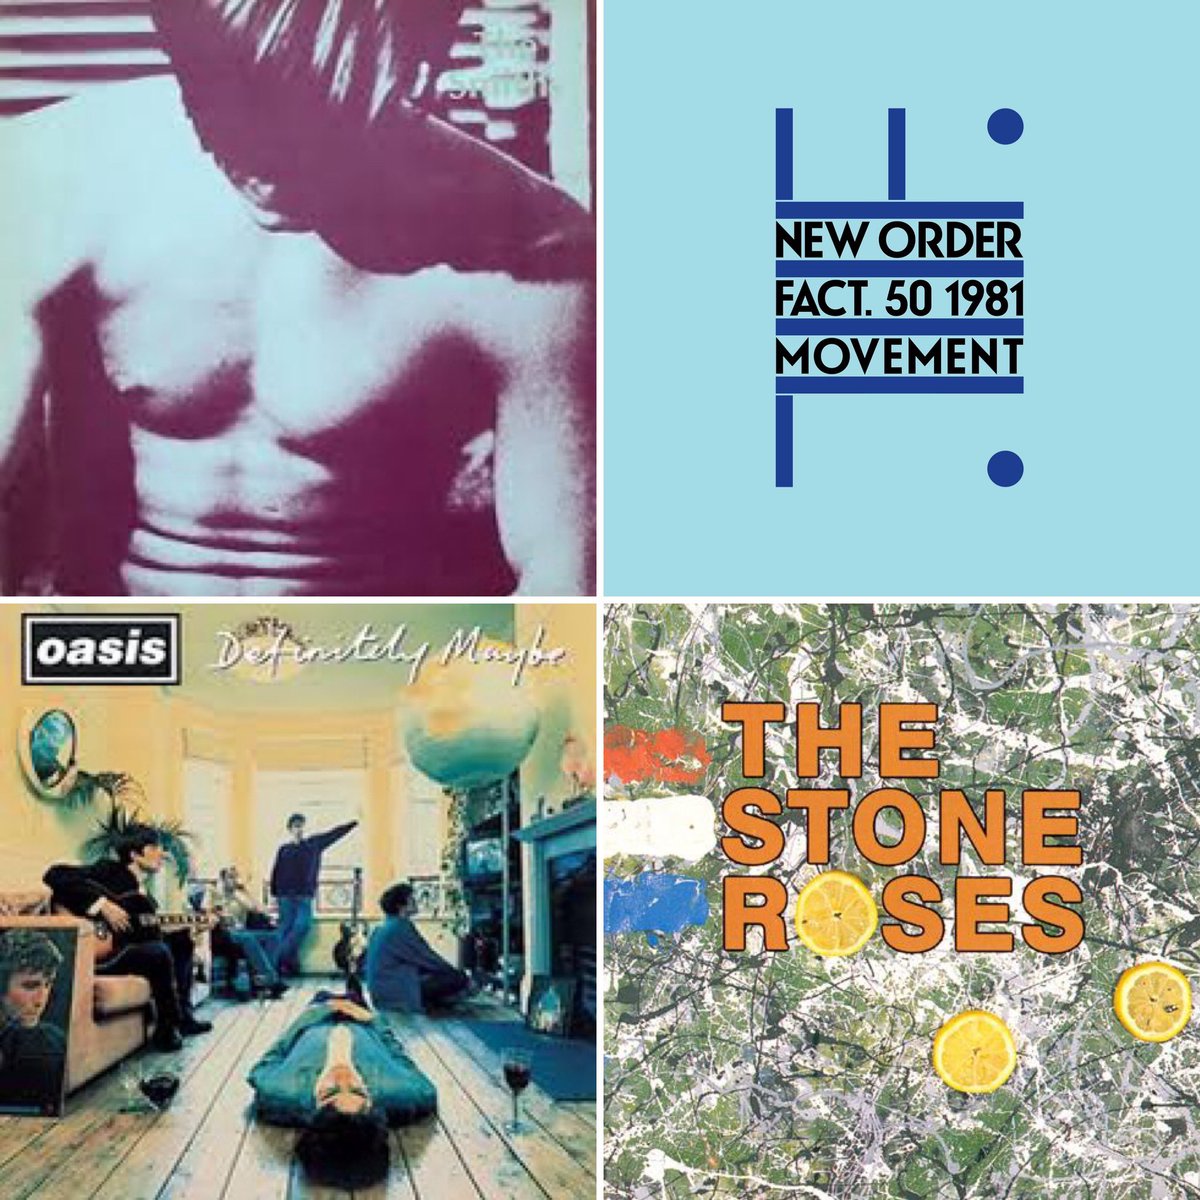 NATIONAL ALBUM DAY
Manchester Debuts. You can buy only one so which do you choose?
#NationalAlbumDay
#Oasis #TheStoneRoses #TheSmiths #NewOrder